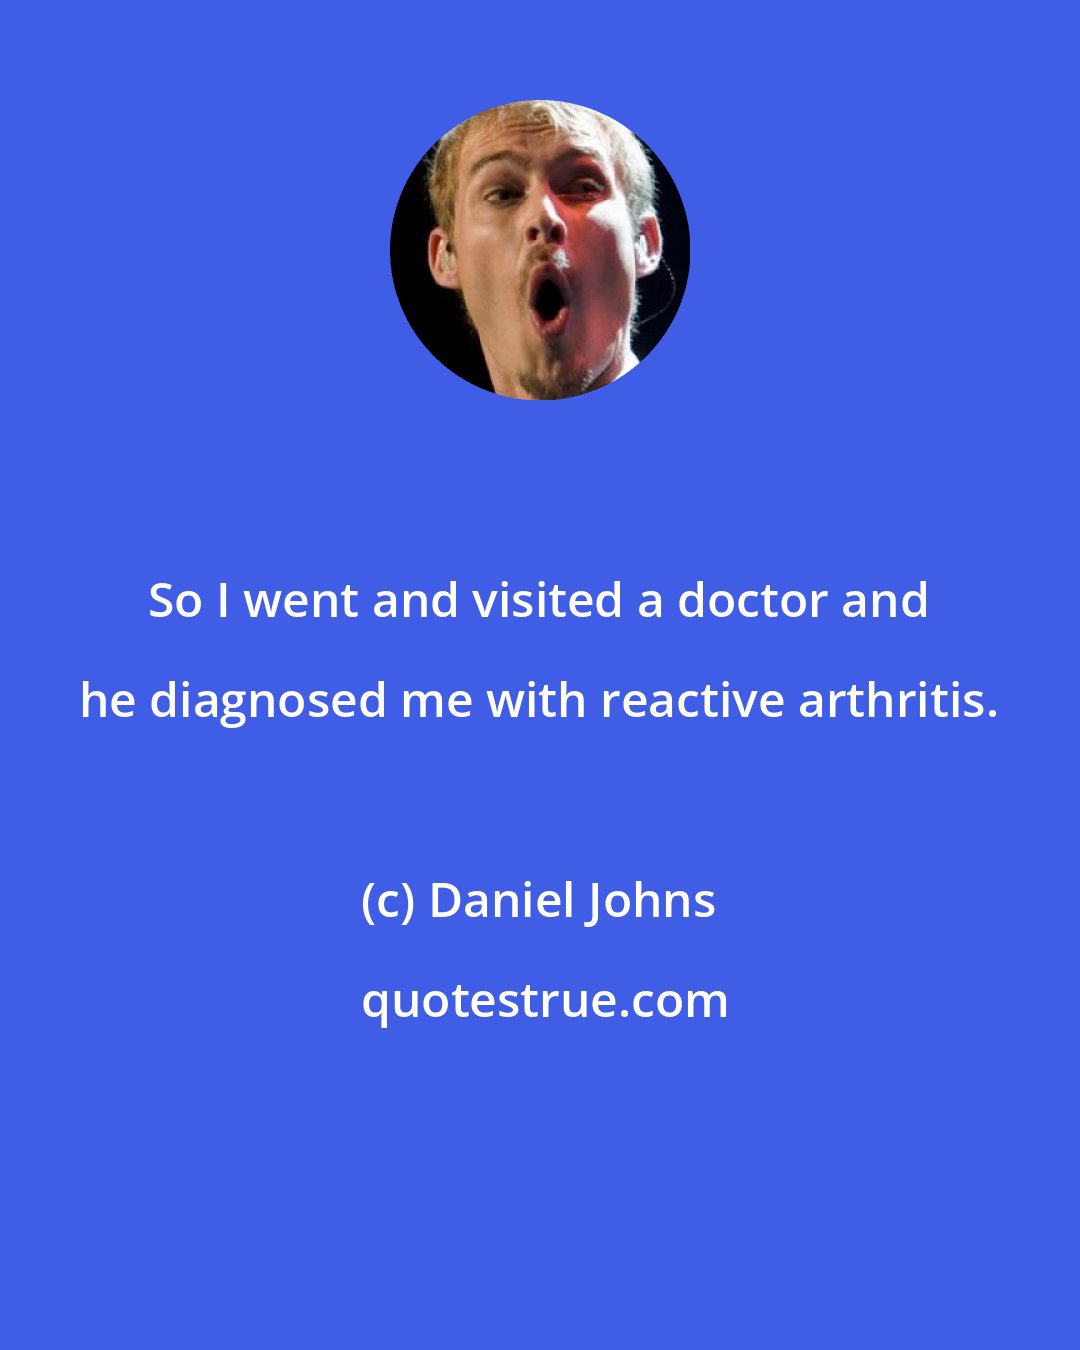 Daniel Johns: So I went and visited a doctor and he diagnosed me with reactive arthritis.